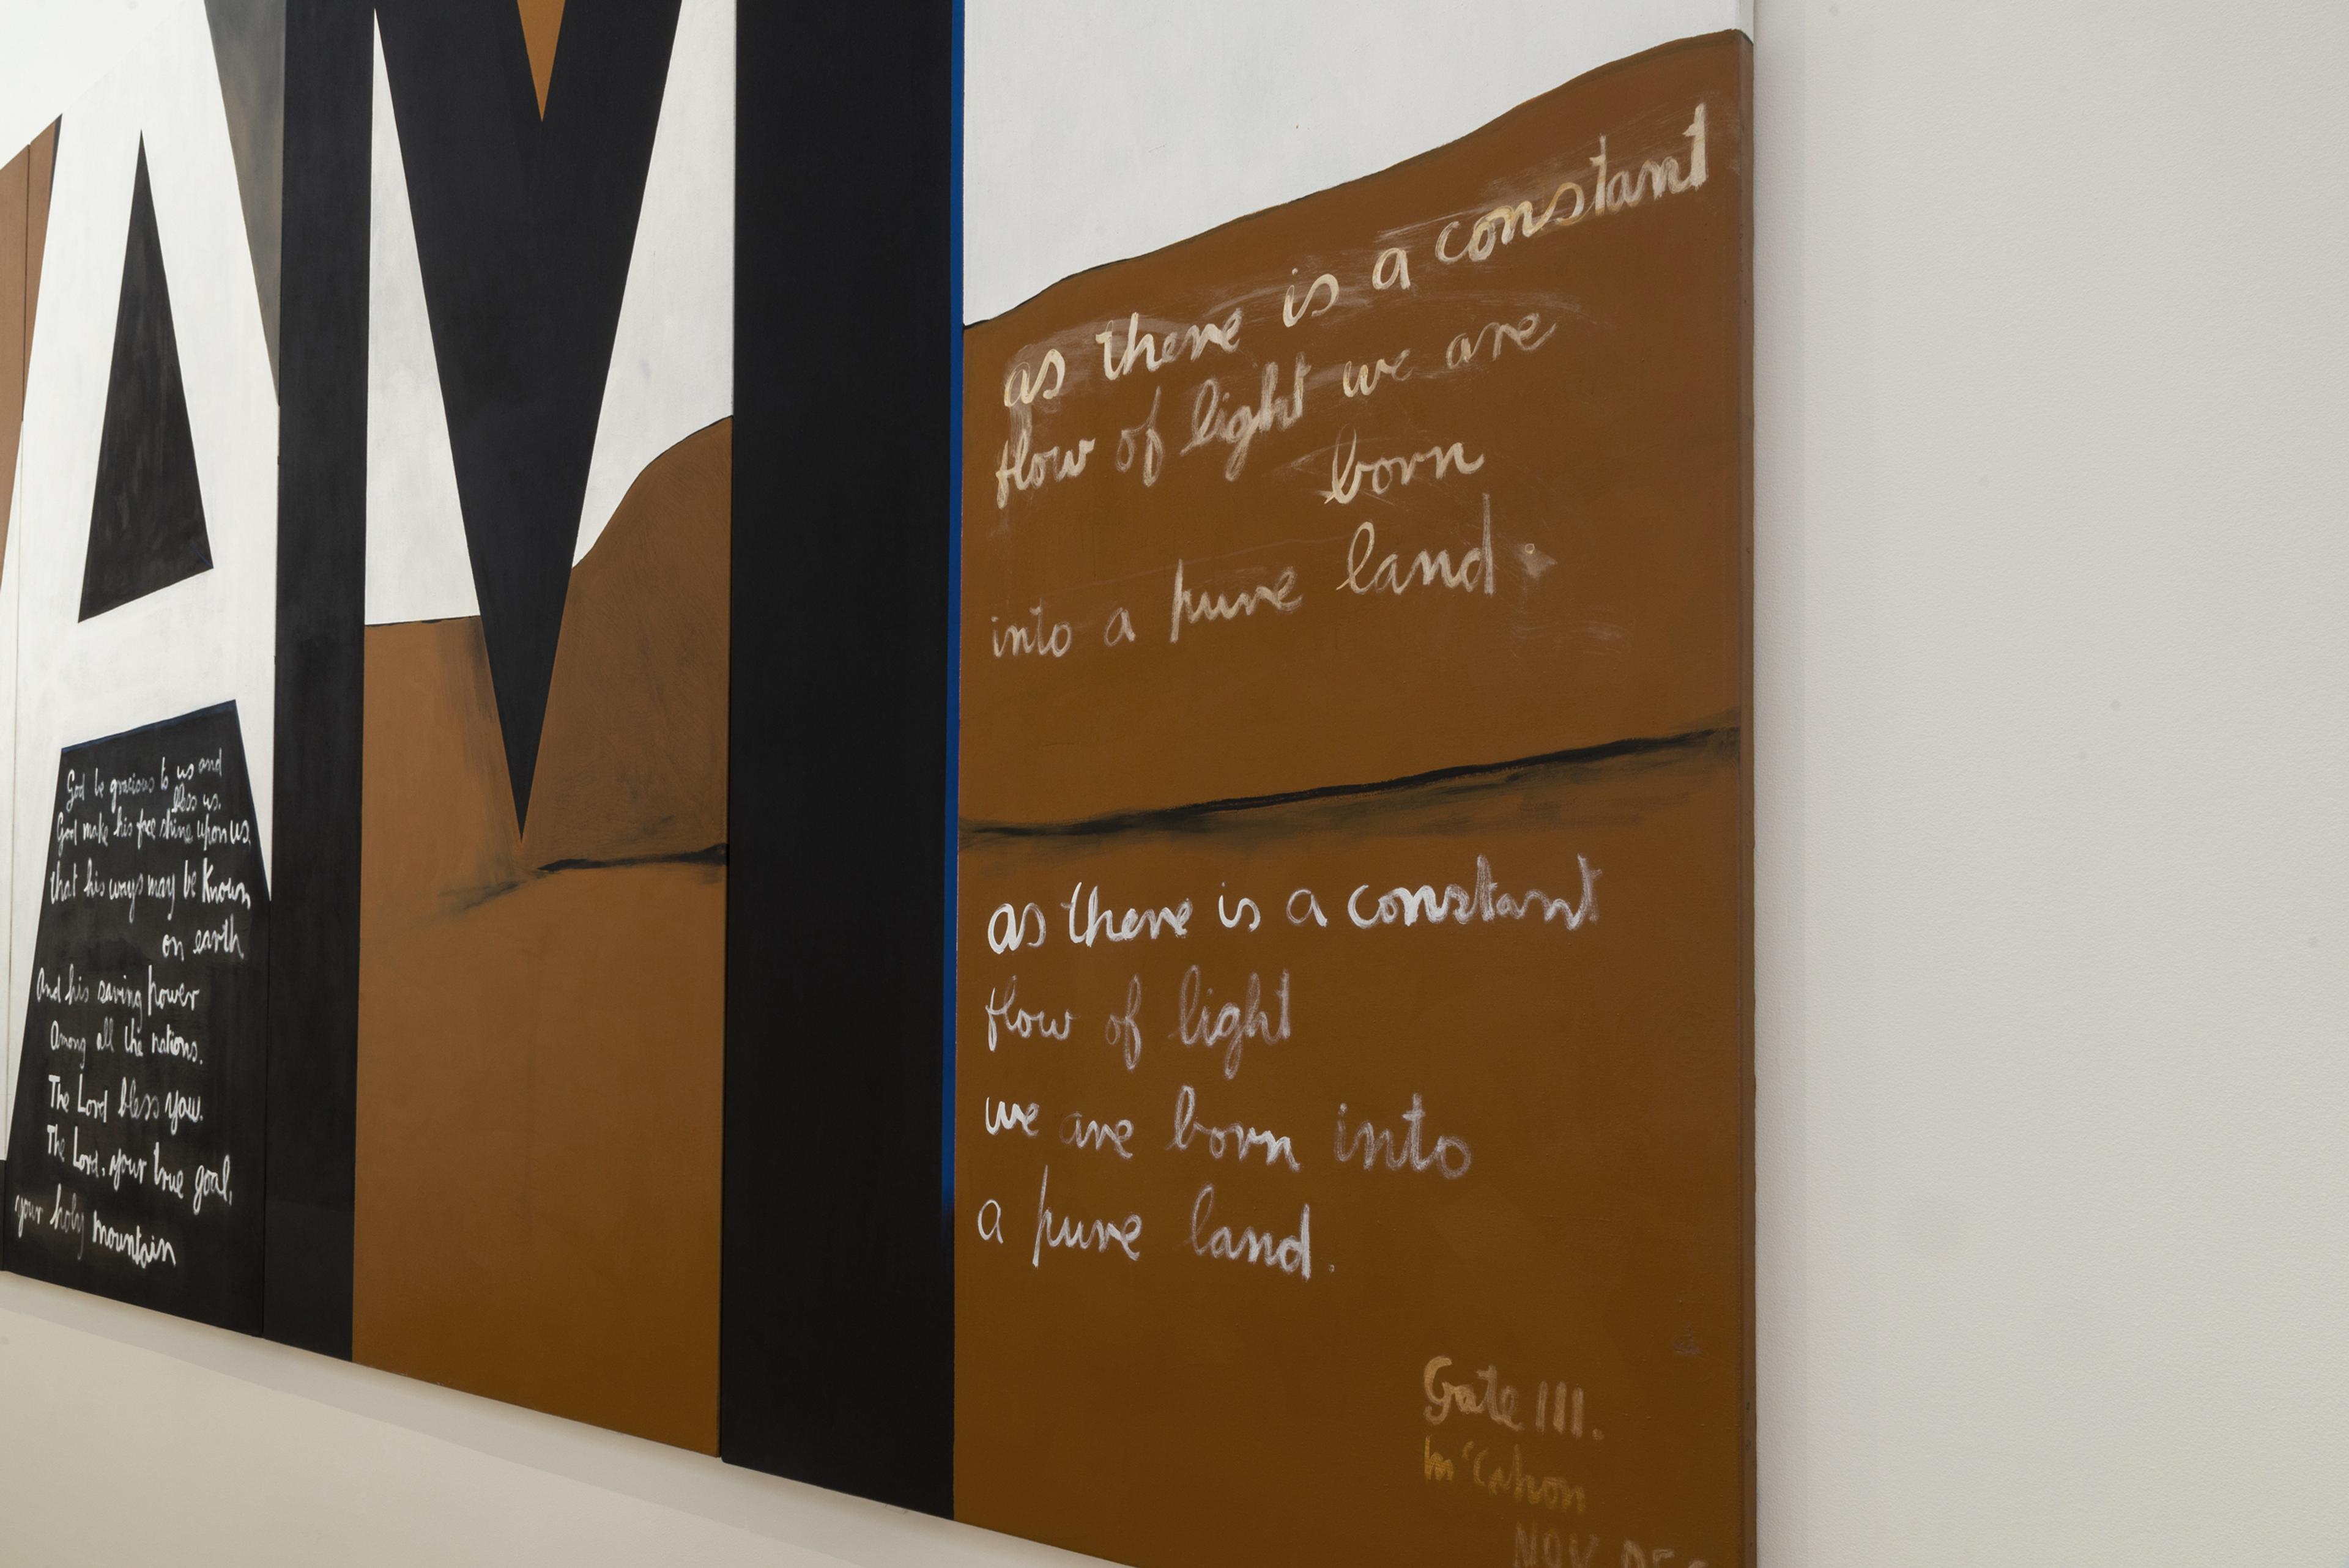 Colin McCahon, Gate III (detail), 1970, acrylic on canvas, Victoria University of Wellington Art Collection, purchased with the assistance of Queen Elizabeth II Arts Council, 1972. Photo: Shaun Matthews